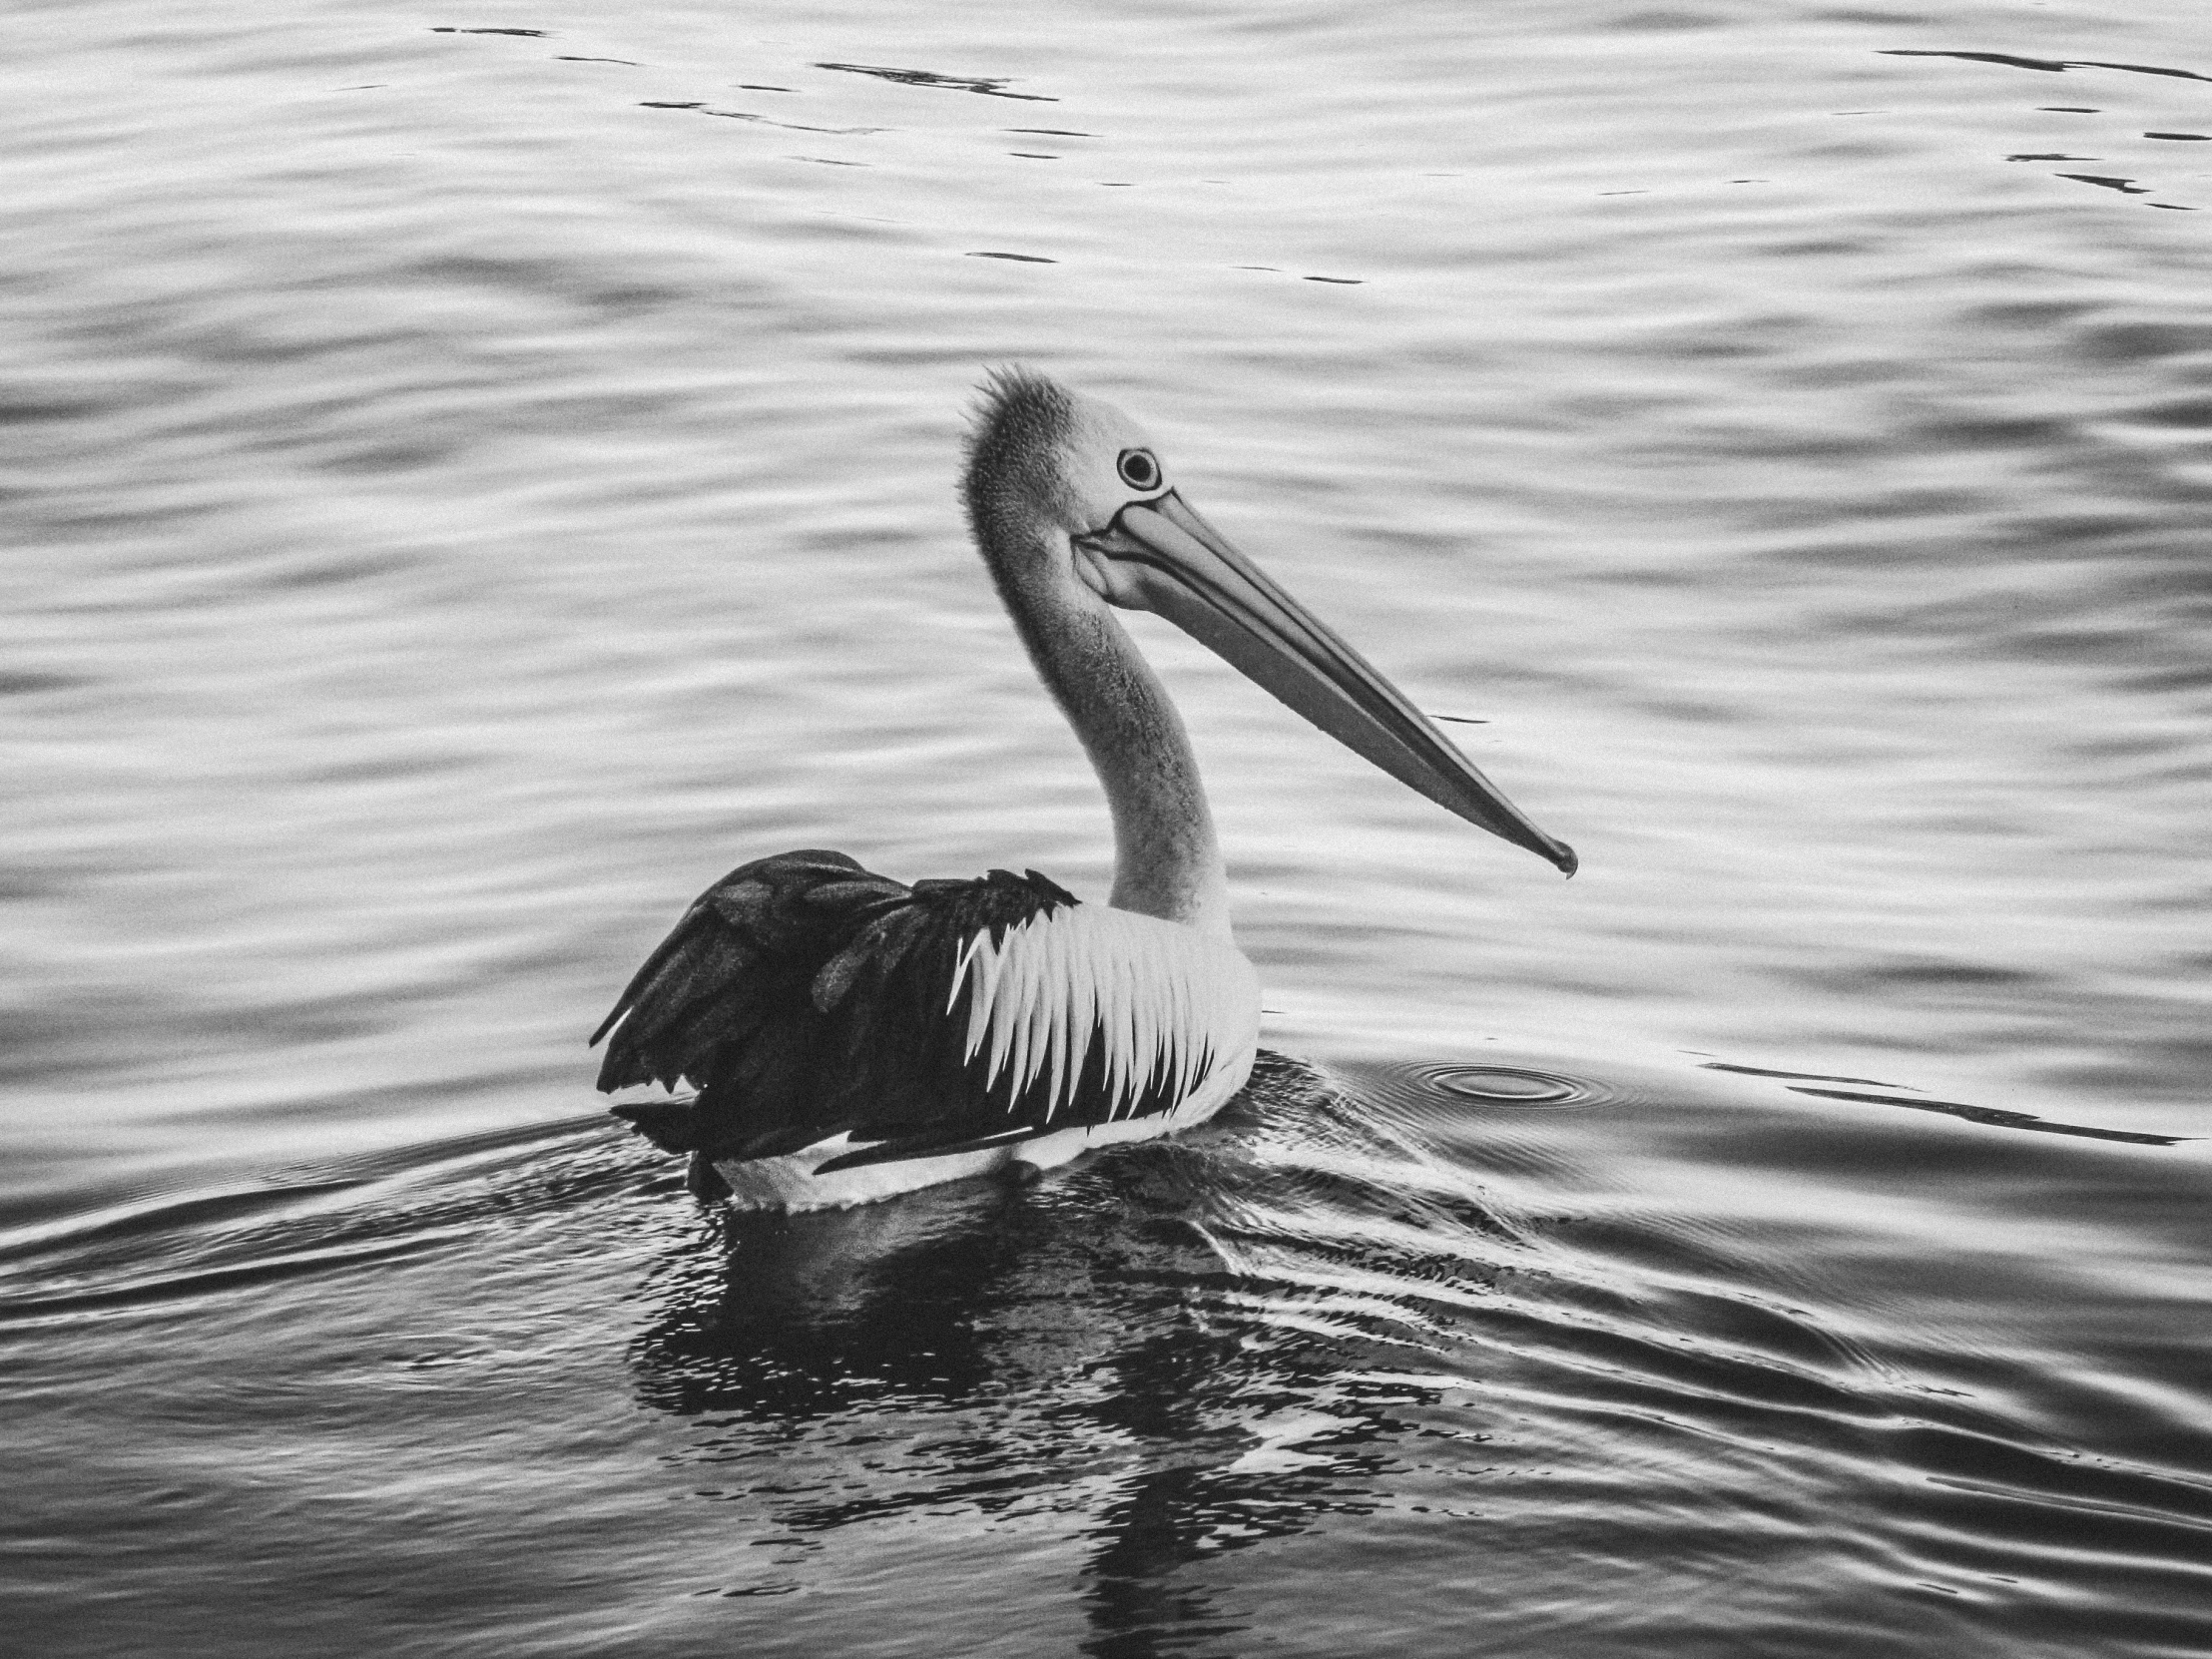 a long beaked pelican floats in the water